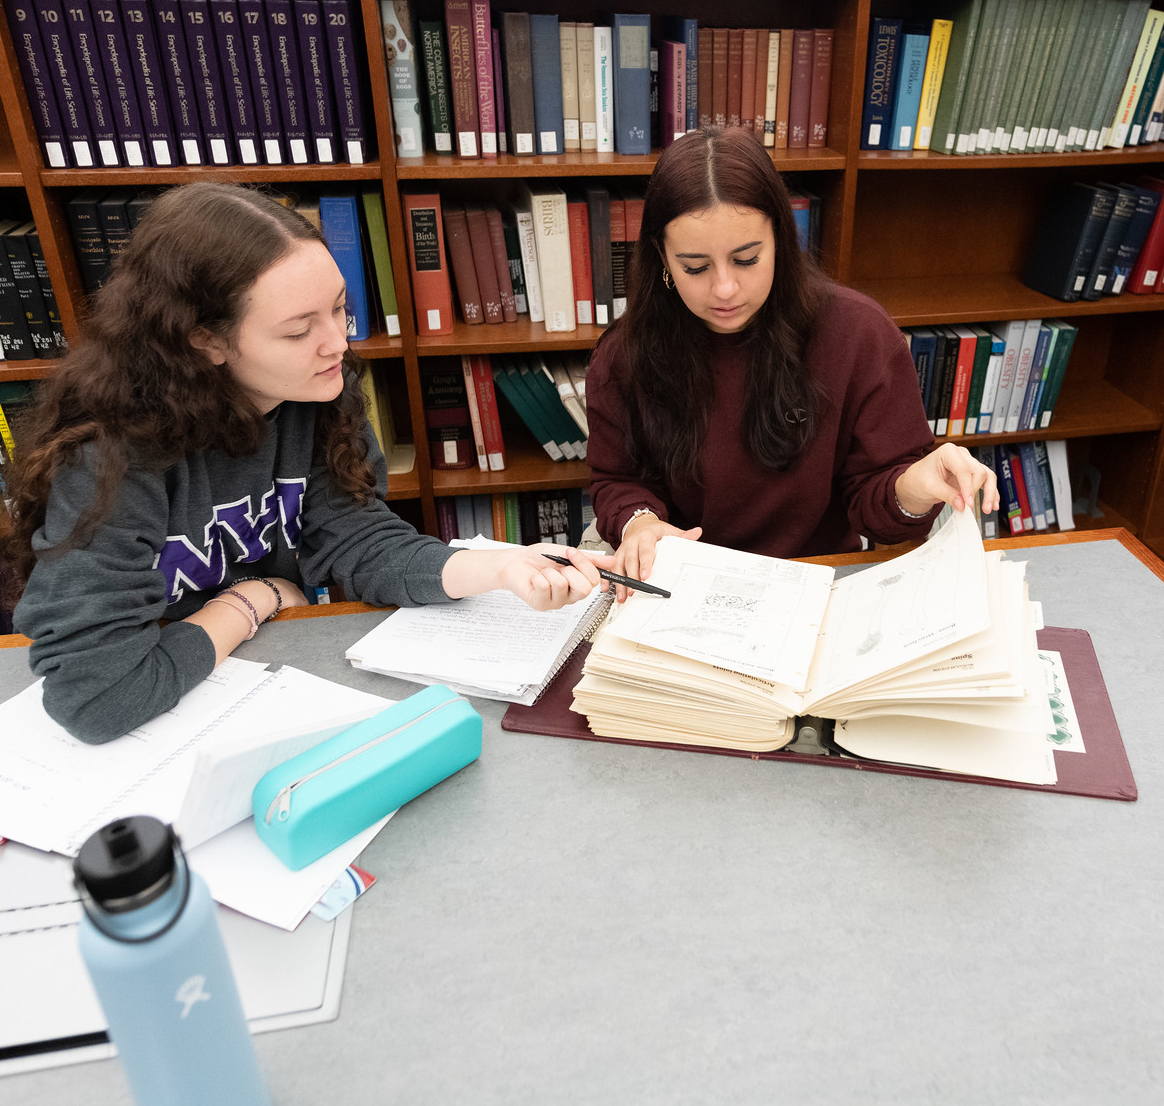 Two female students study in a campus library. They have big books open on the table in front of them.